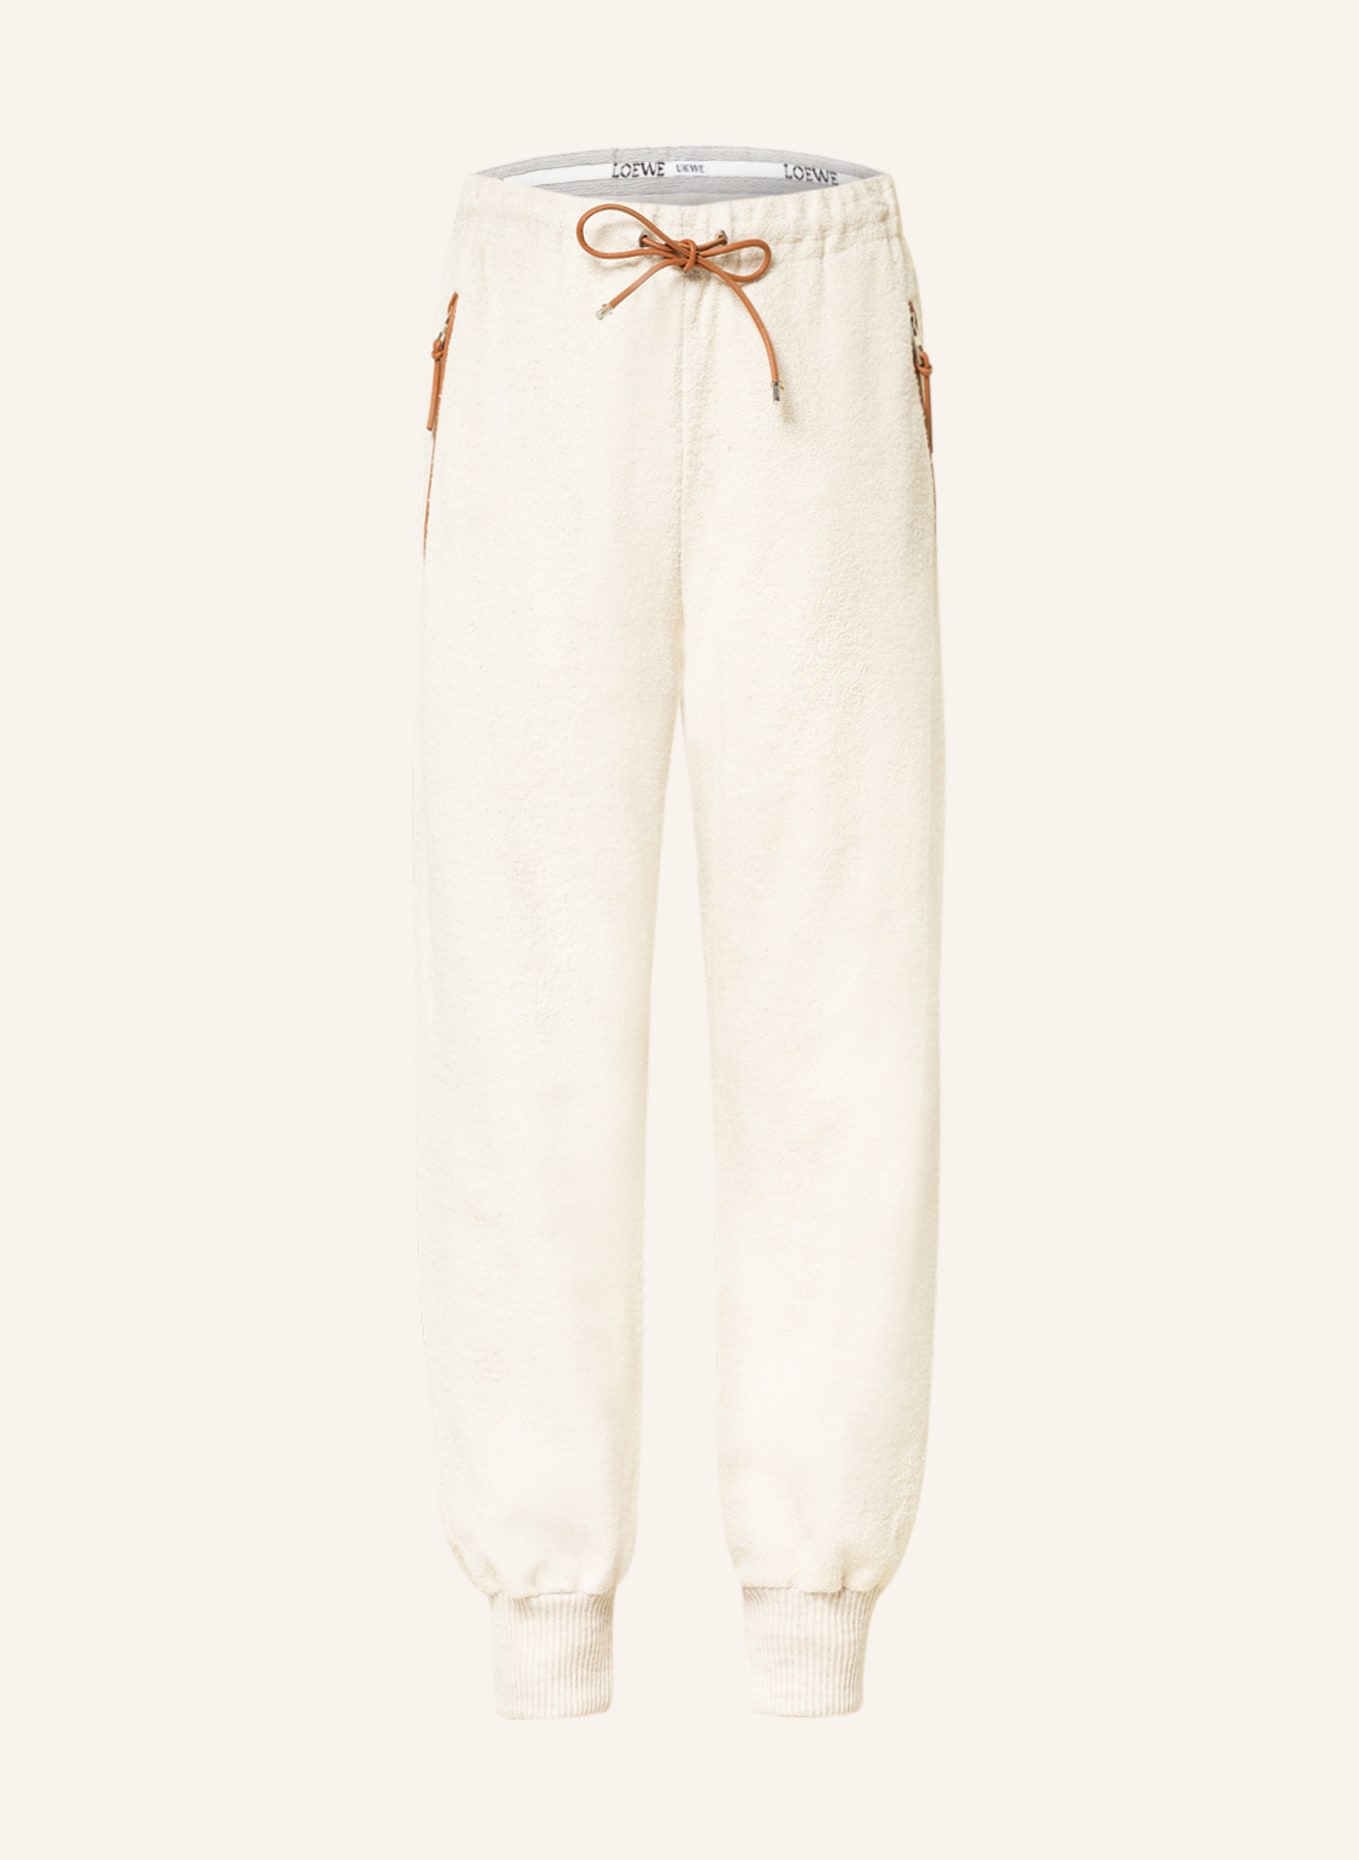 LOEWE Trousers in jogger style, Color: ECRU (Image 1)